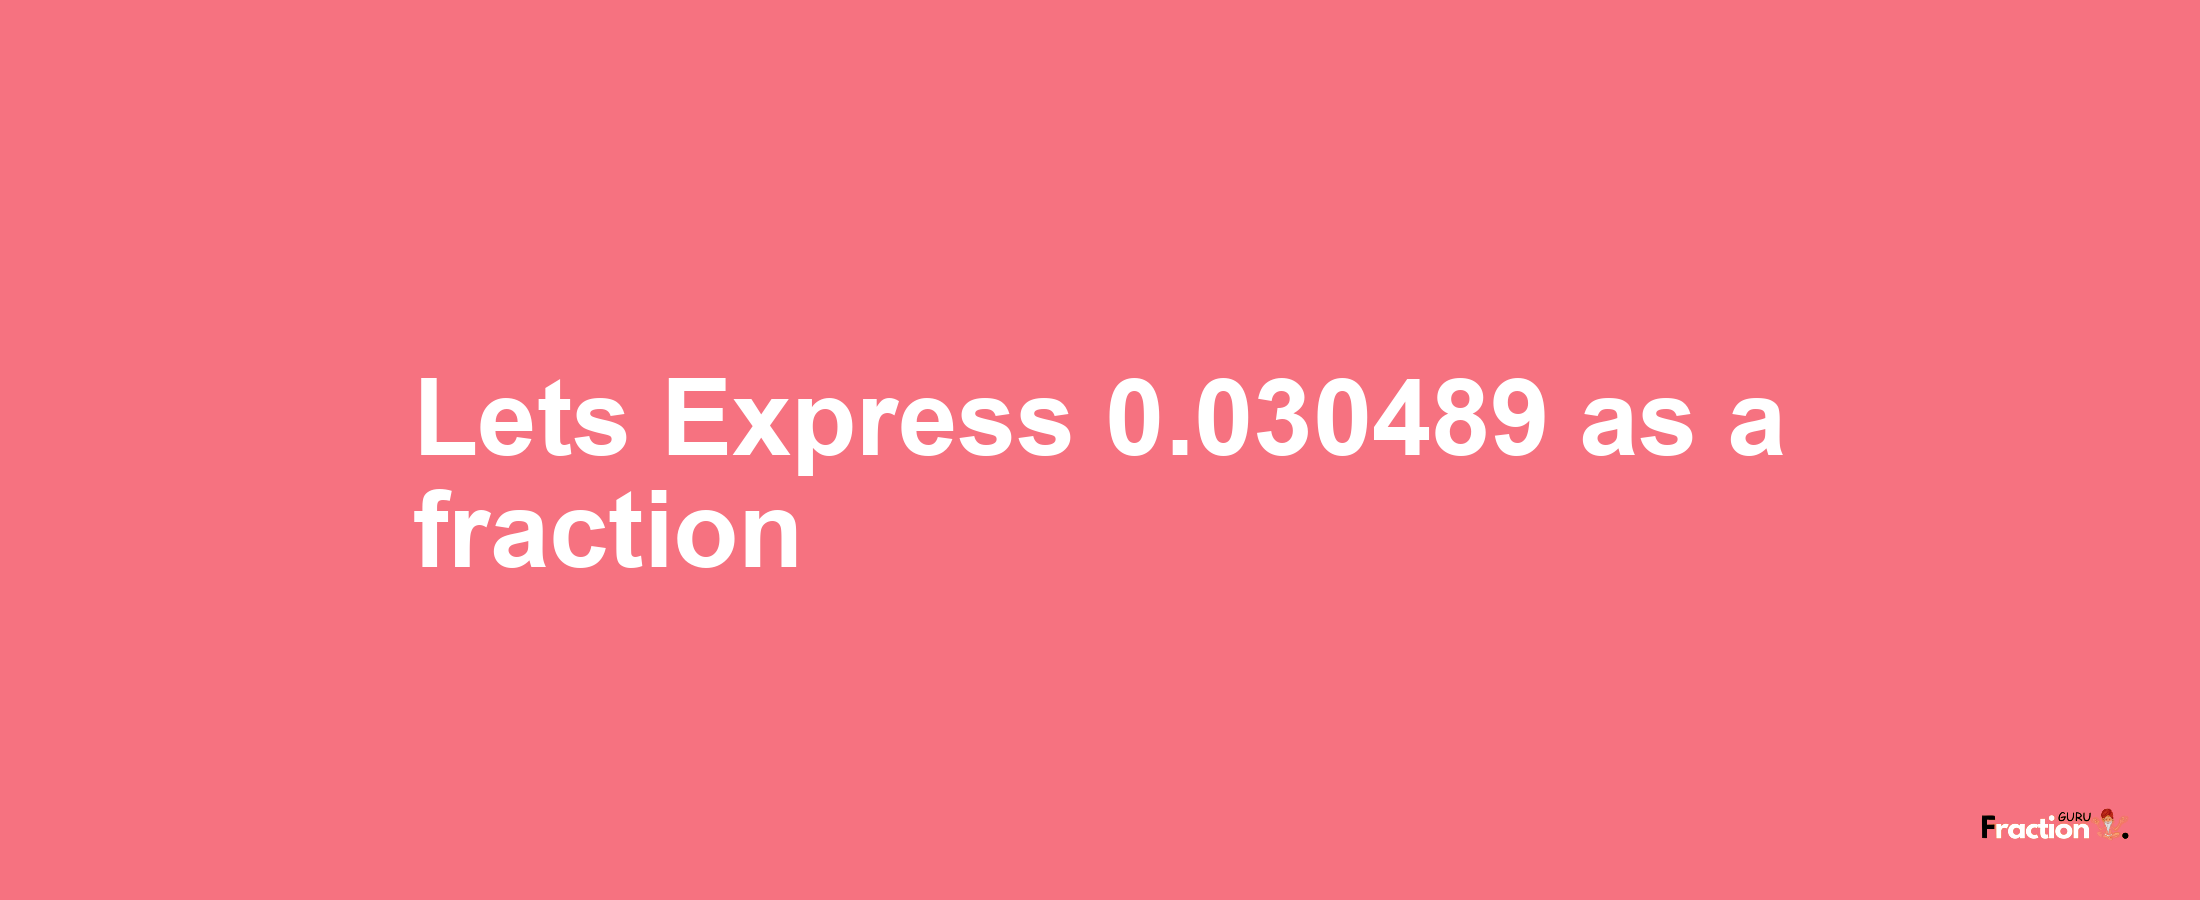 Lets Express 0.030489 as afraction